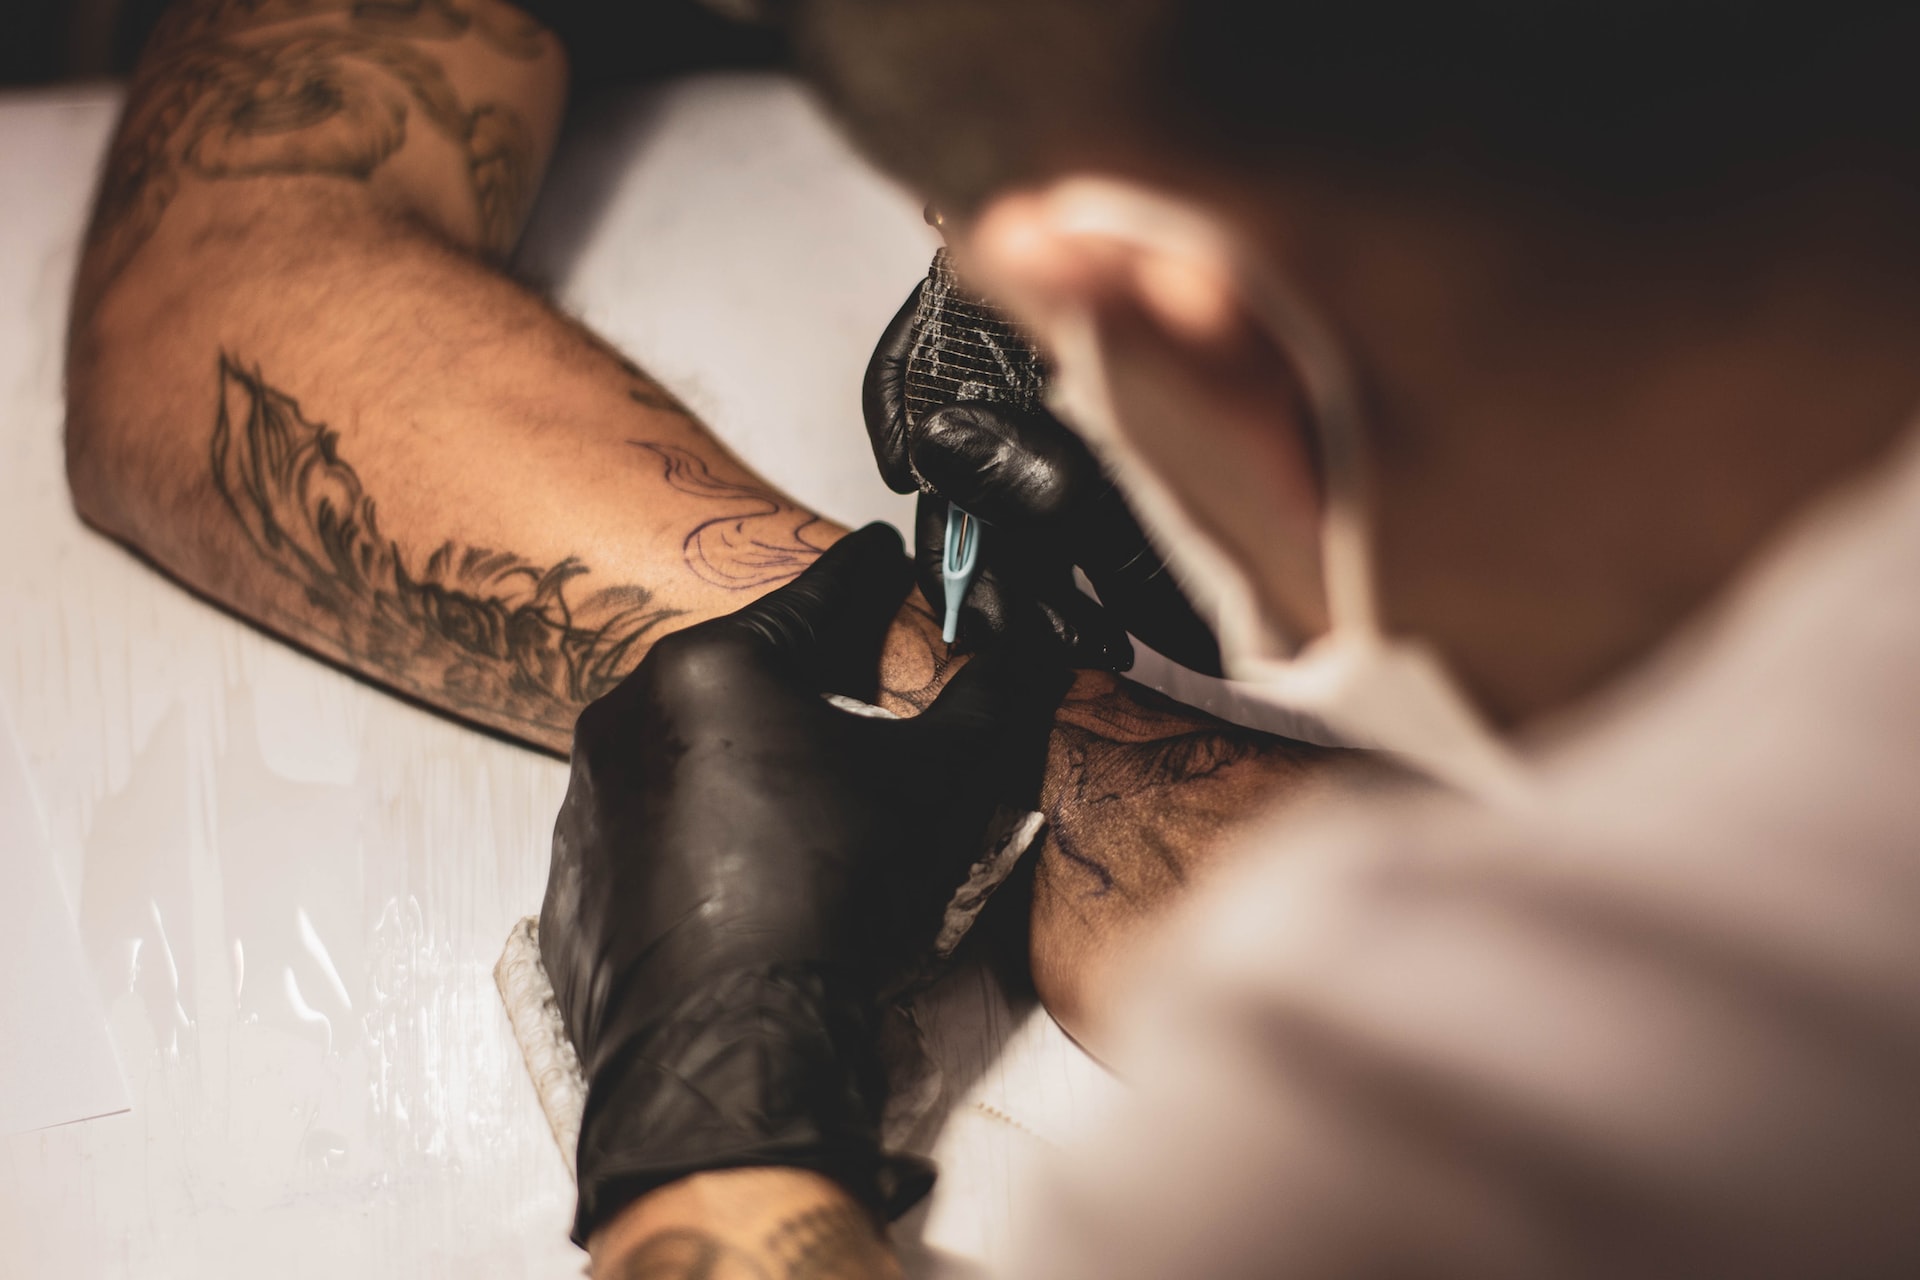 Factors That Affect a Tattoo Artist's Income